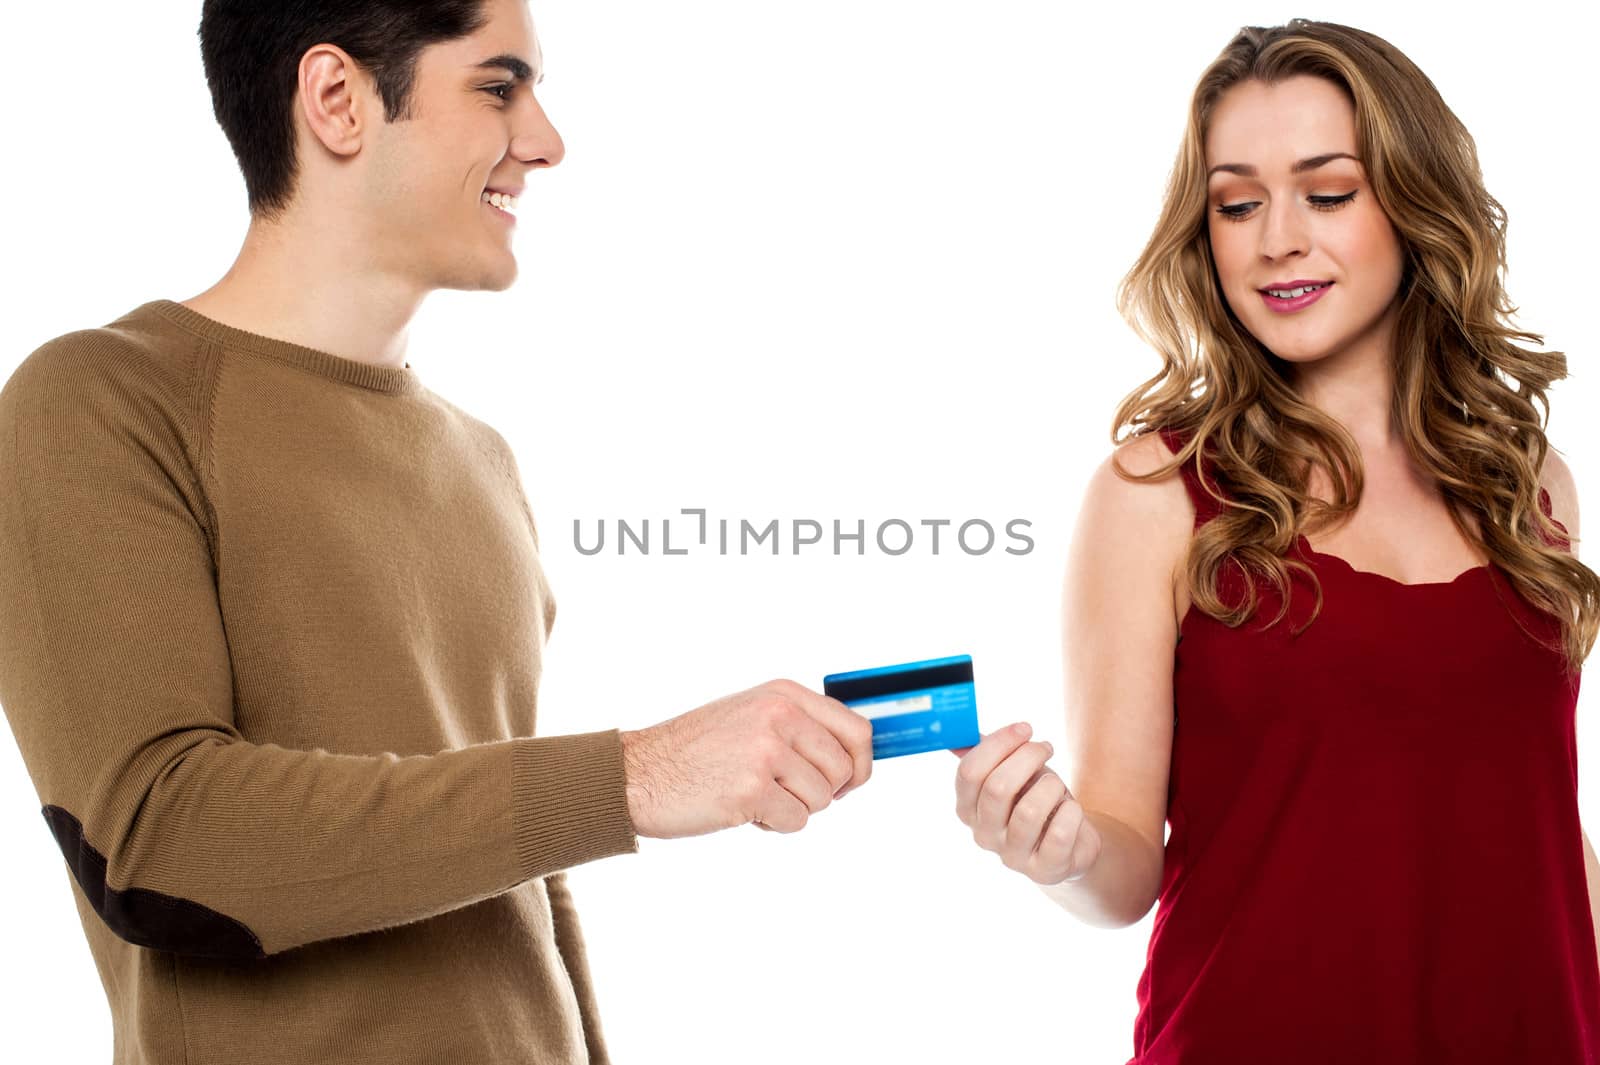 Young guy giving credit card to his girlfriend